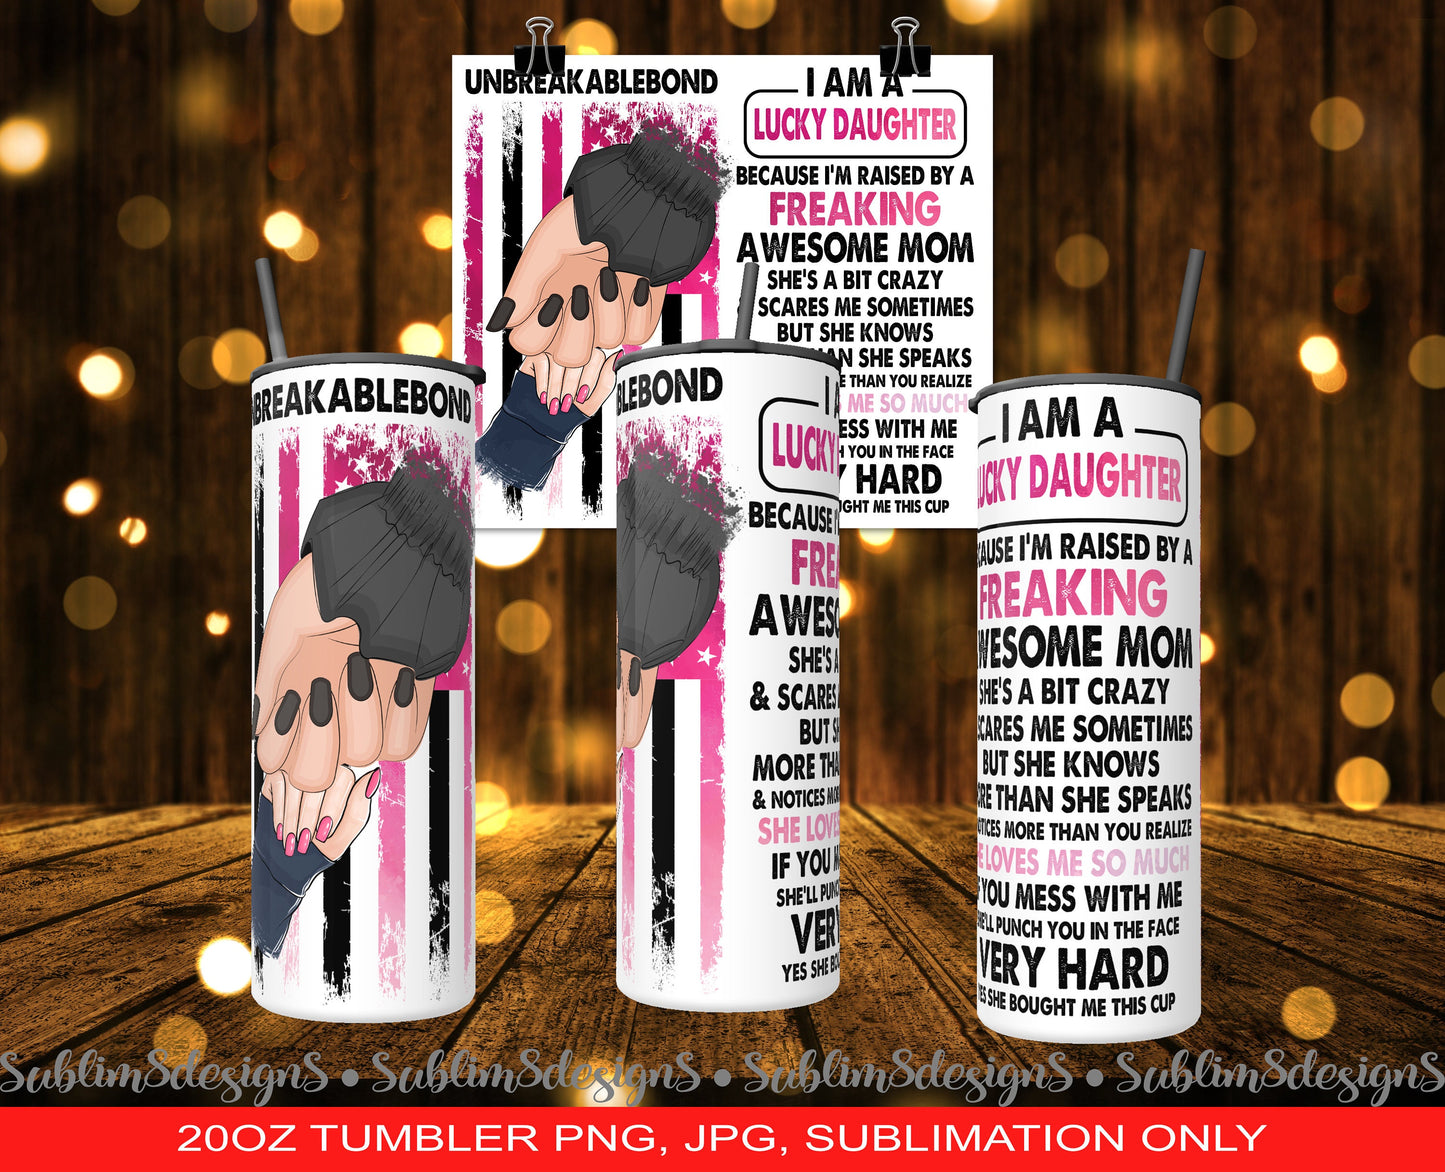 I Am A Lucky Daughter -  Mother's Day Gift - Perfect for the ultimate momma's girl! - Pink 20oz Tumbler Design PNG and JPG ONLY